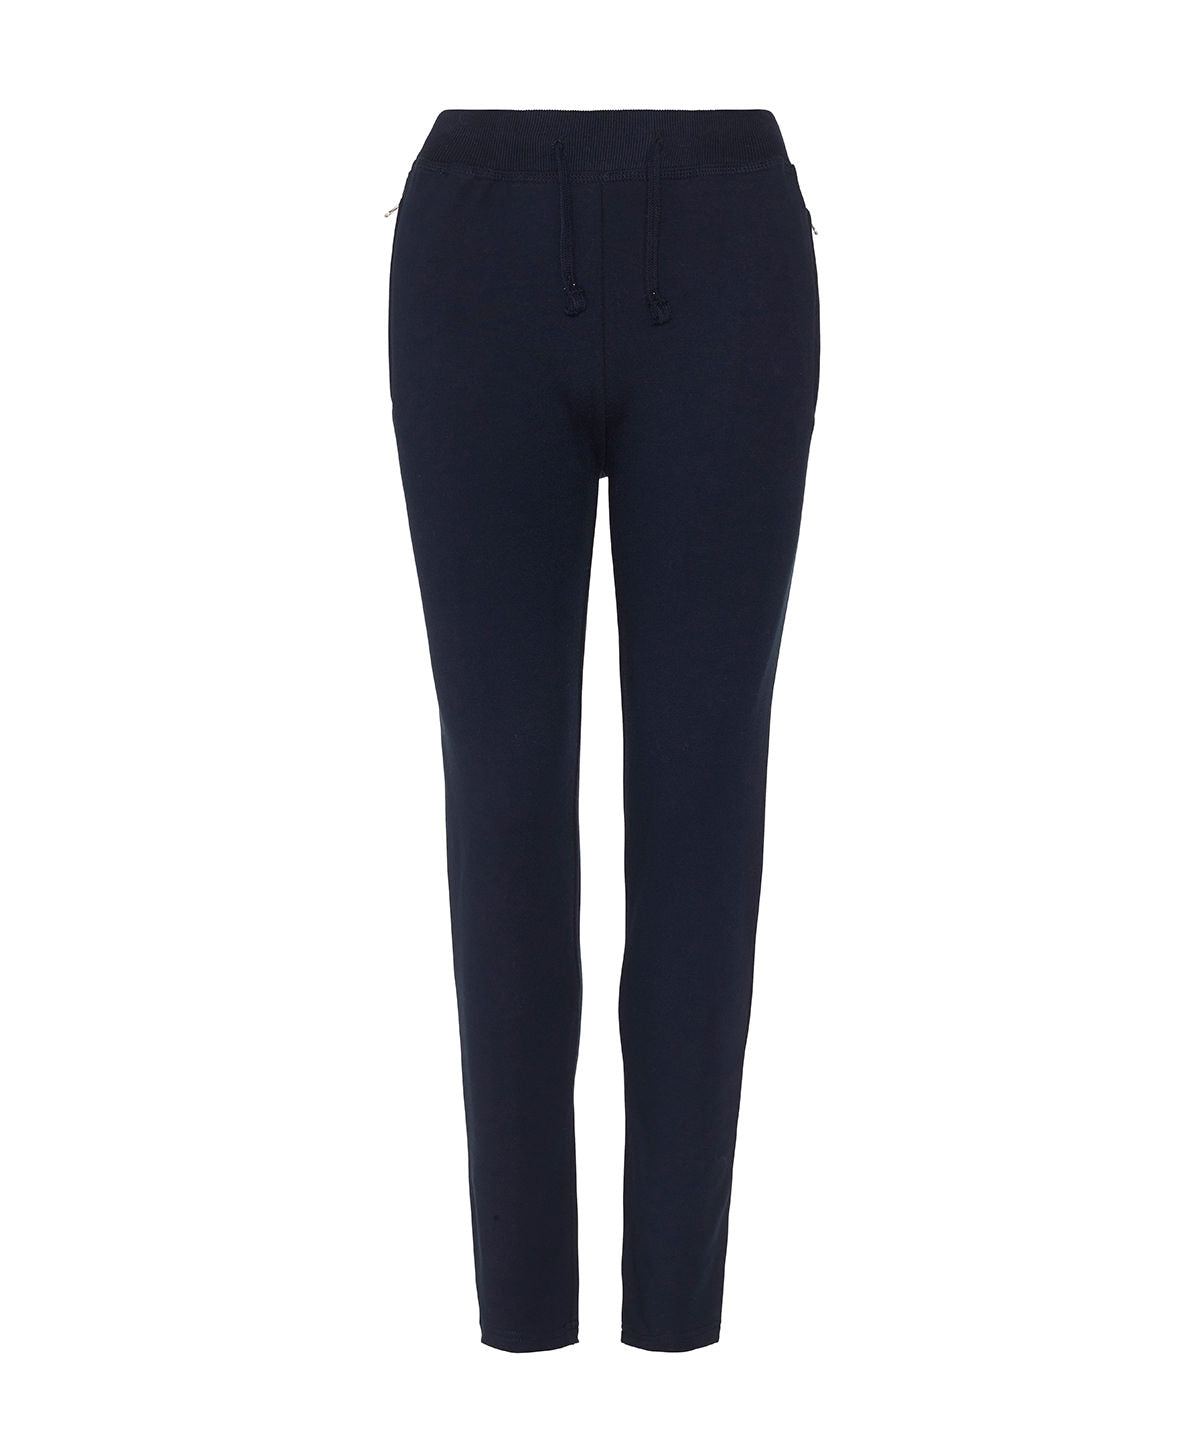 Women's Tapered Track Pants